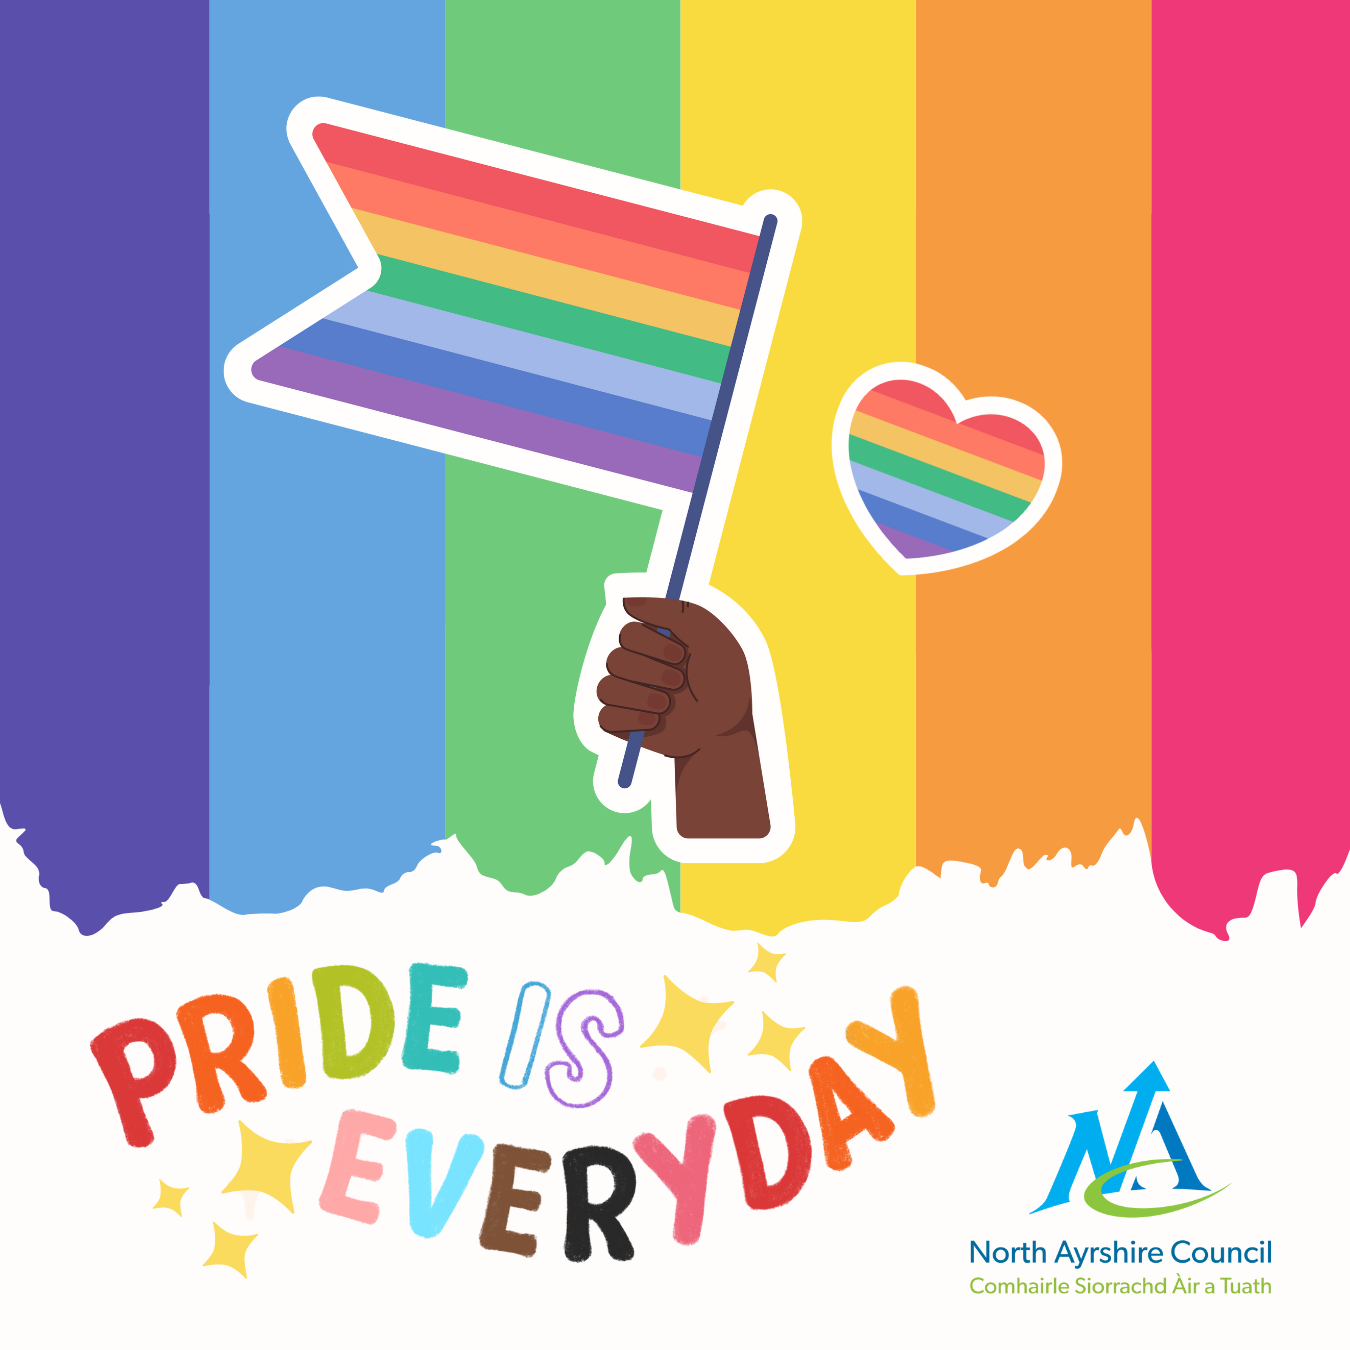 Pride month graphic with rainbow background and 'Pride Is Everyday' text with Council logo